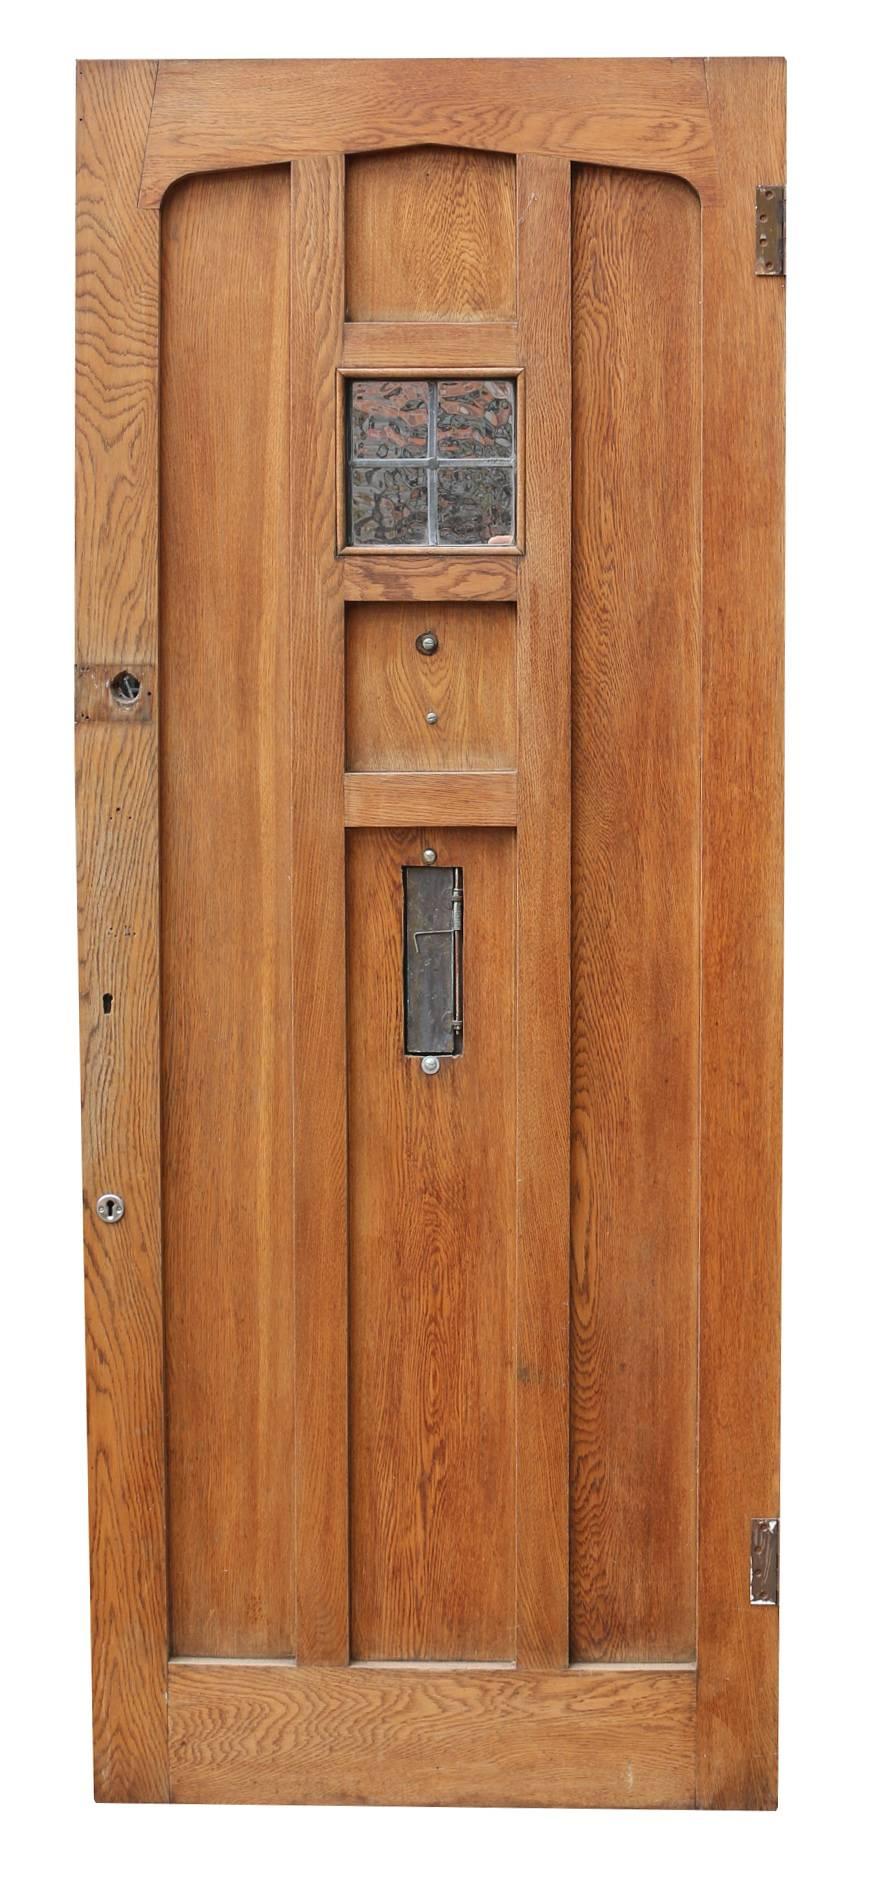 This door has a glass panel, letterbox and door knocker.
(Please note that glass is not insured in transit outside of the UK).